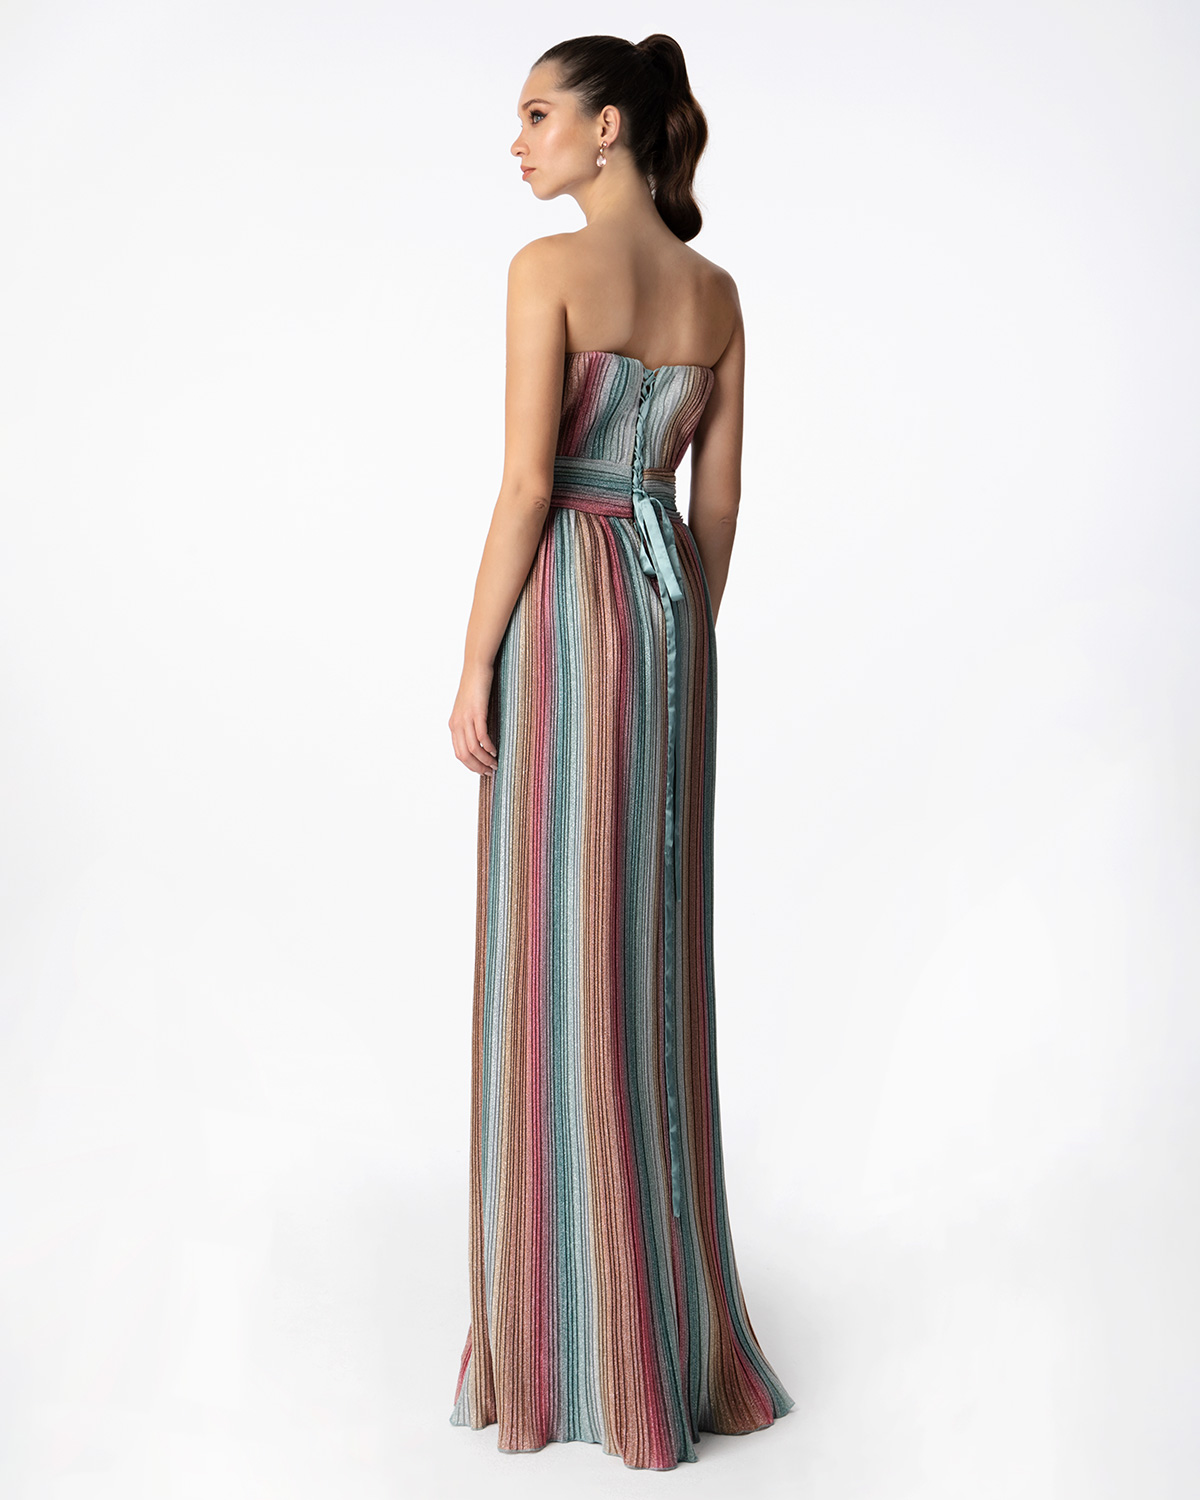 Cocktail Dresses / Long cocktail pleated strapless dress with shining fabric